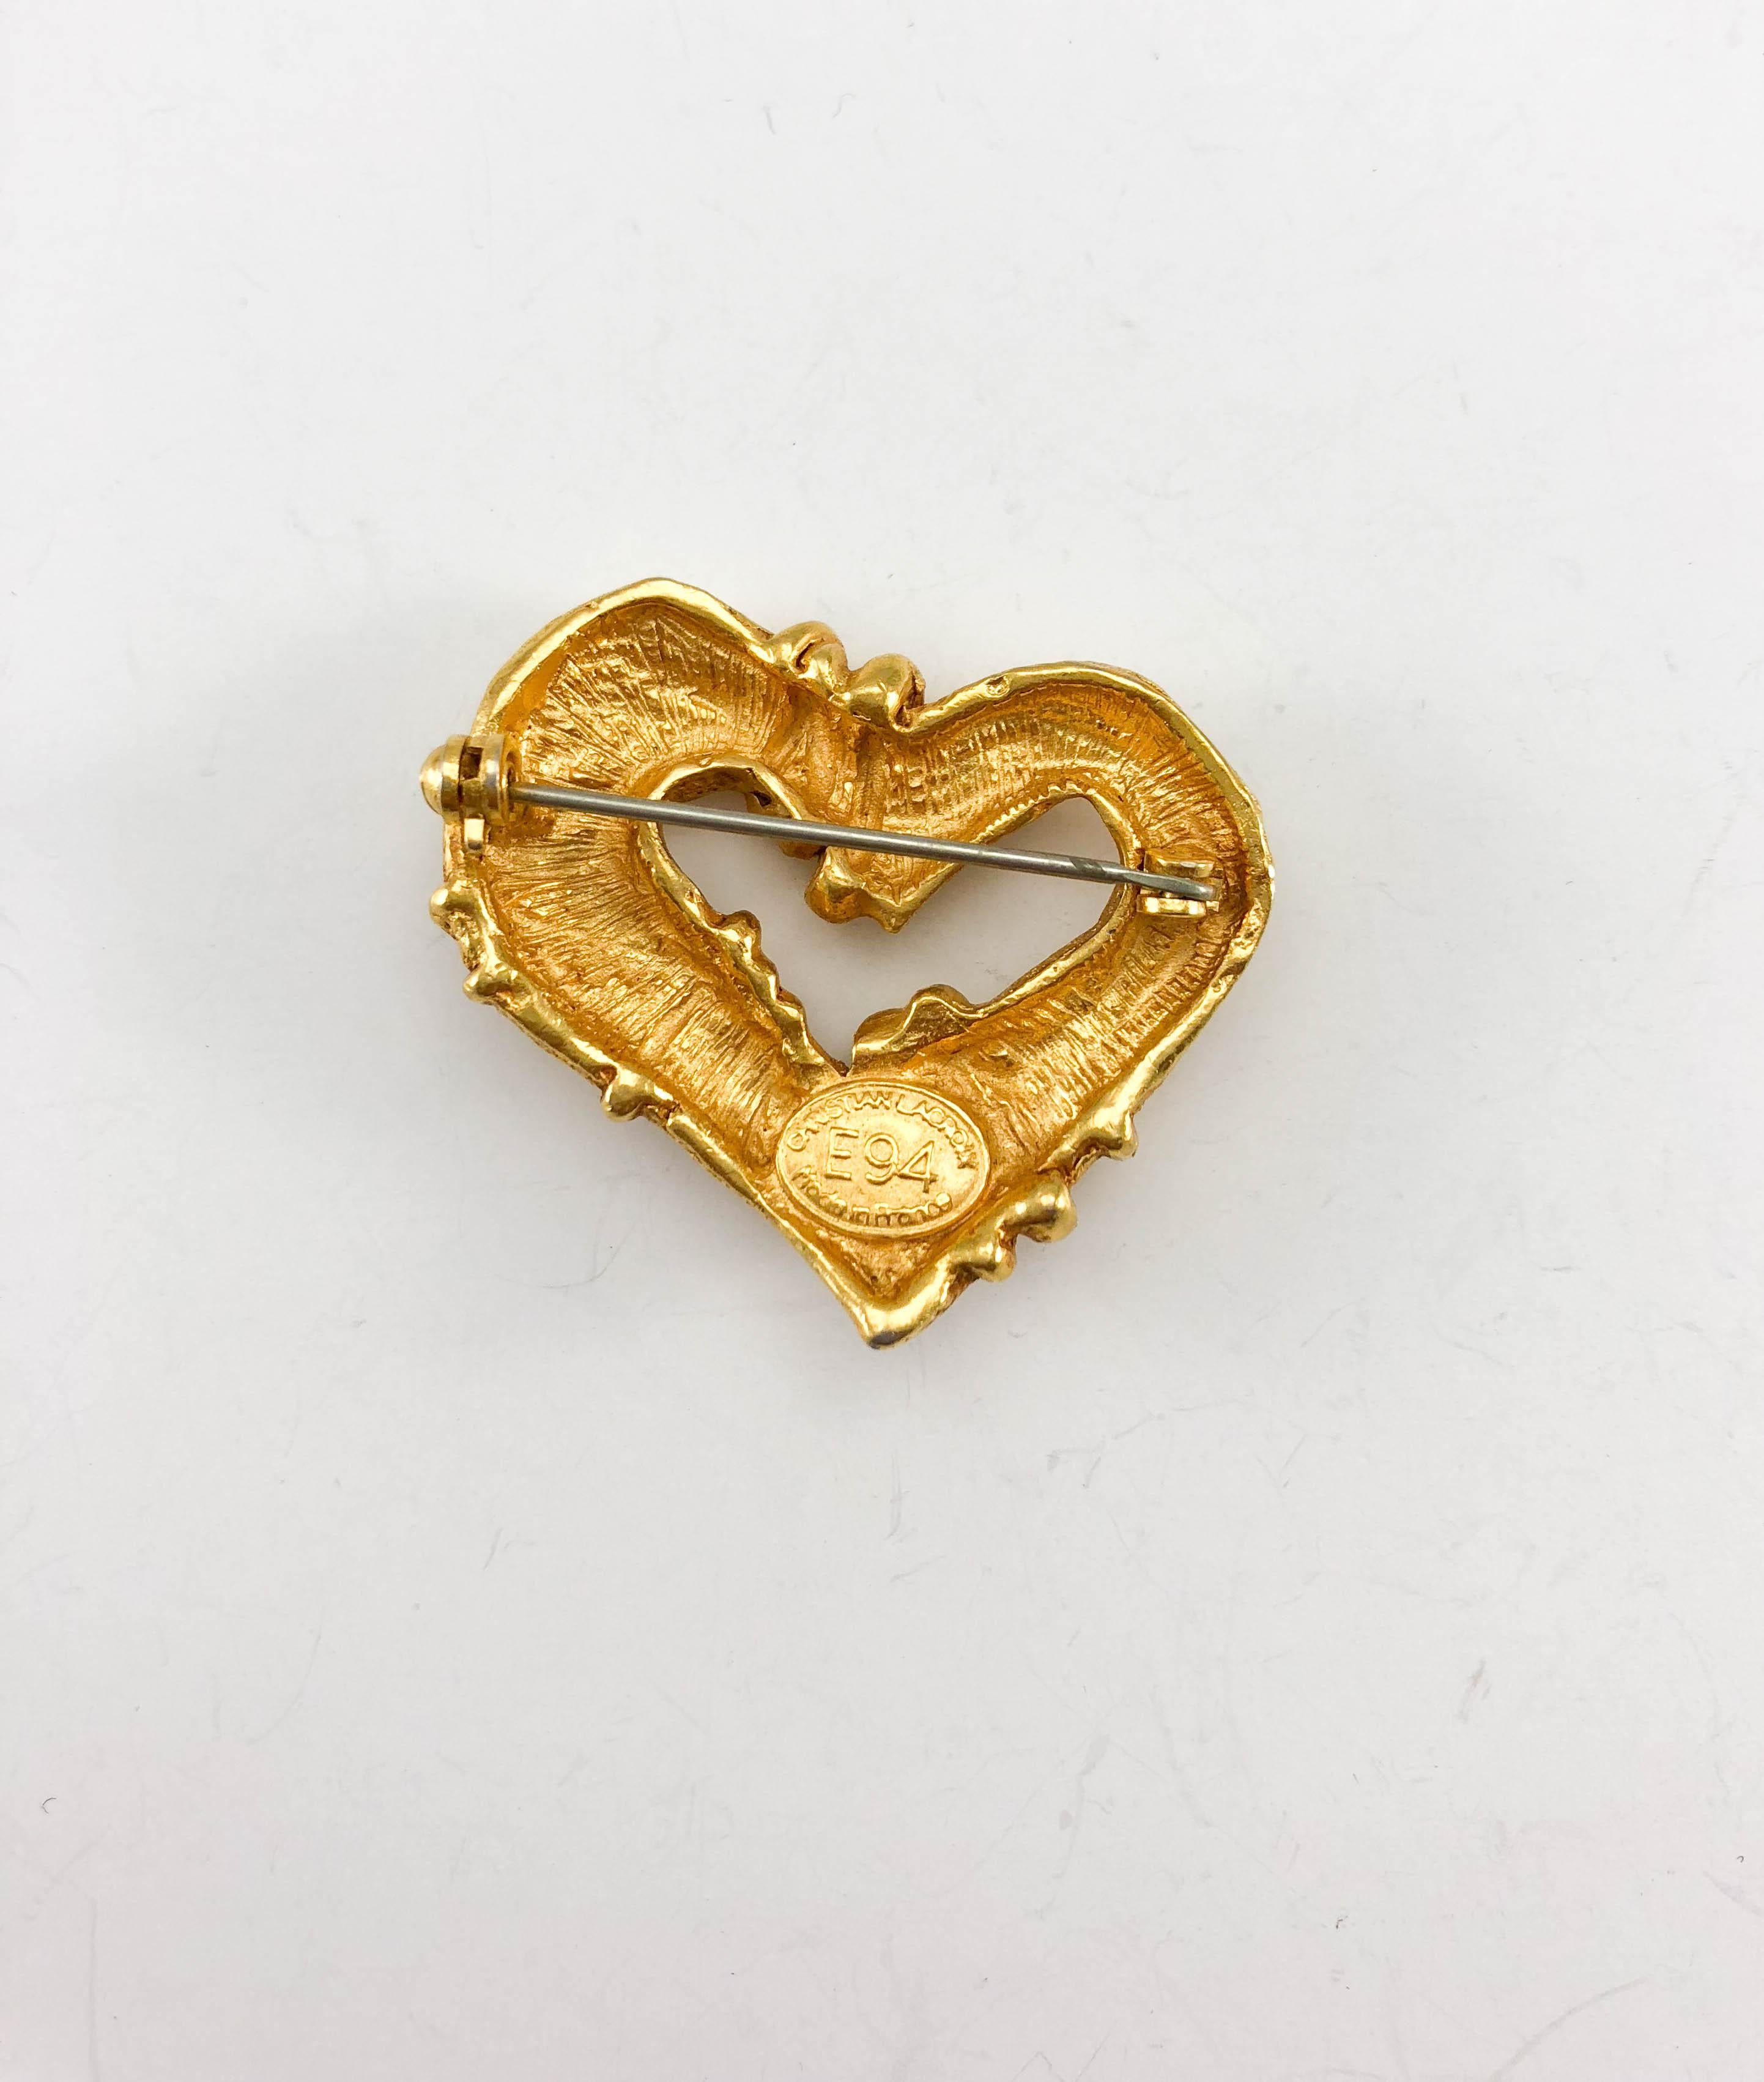 1994 Christian Lacroix Gold-Plated Heart Brooch, by Robert Goossens For Sale 5